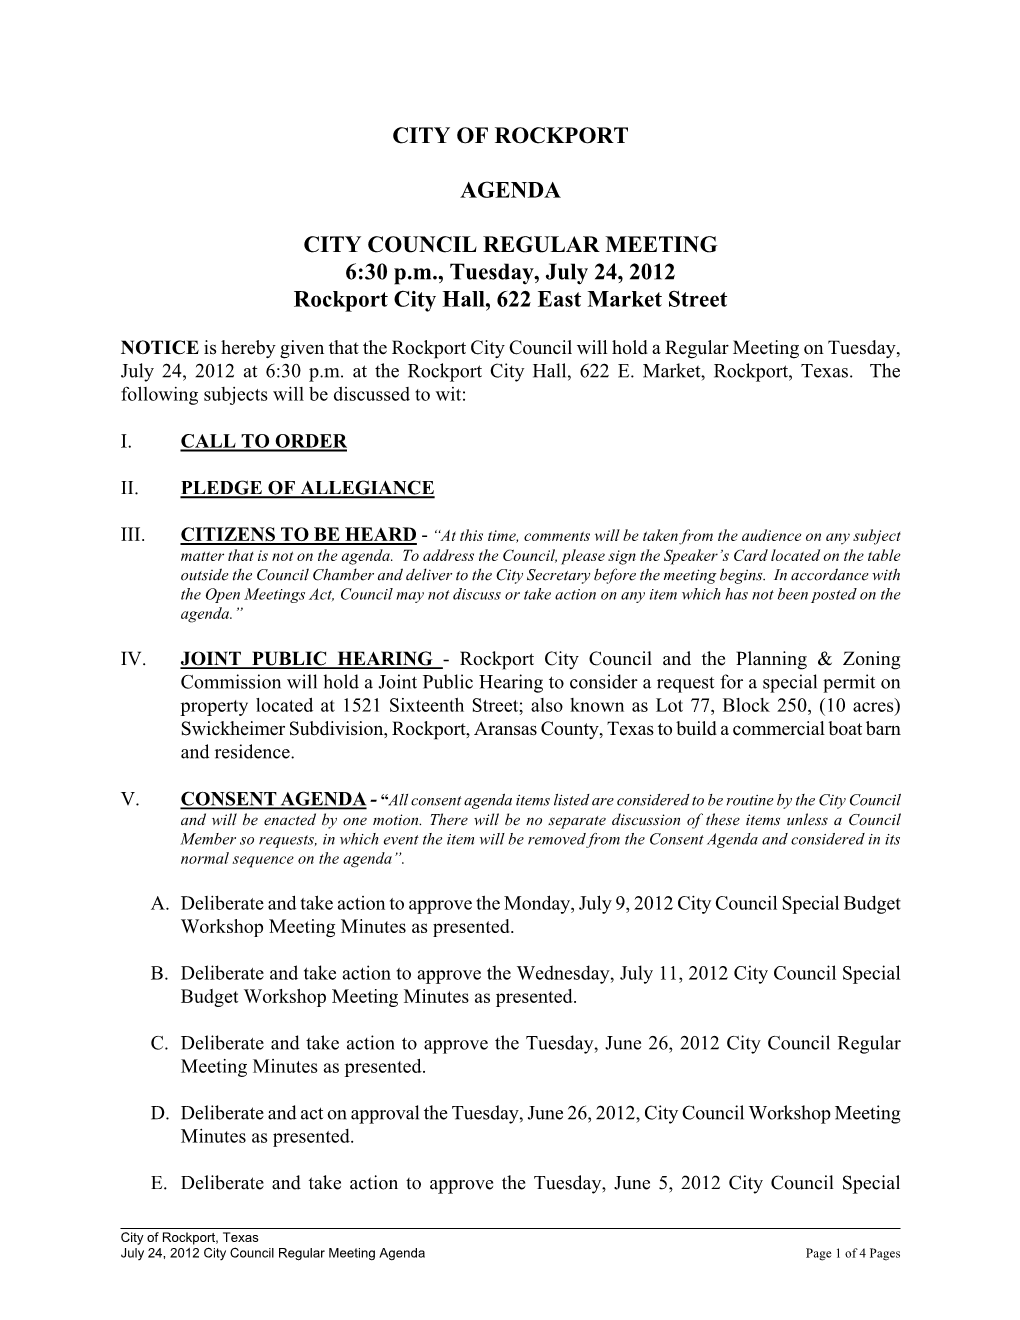 CITY of ROCKPORT AGENDA CITY COUNCIL REGULAR MEETING 6:30 P.M., Tuesday, July 24, 2012 Rockport City Hall, 622 East Market Stree